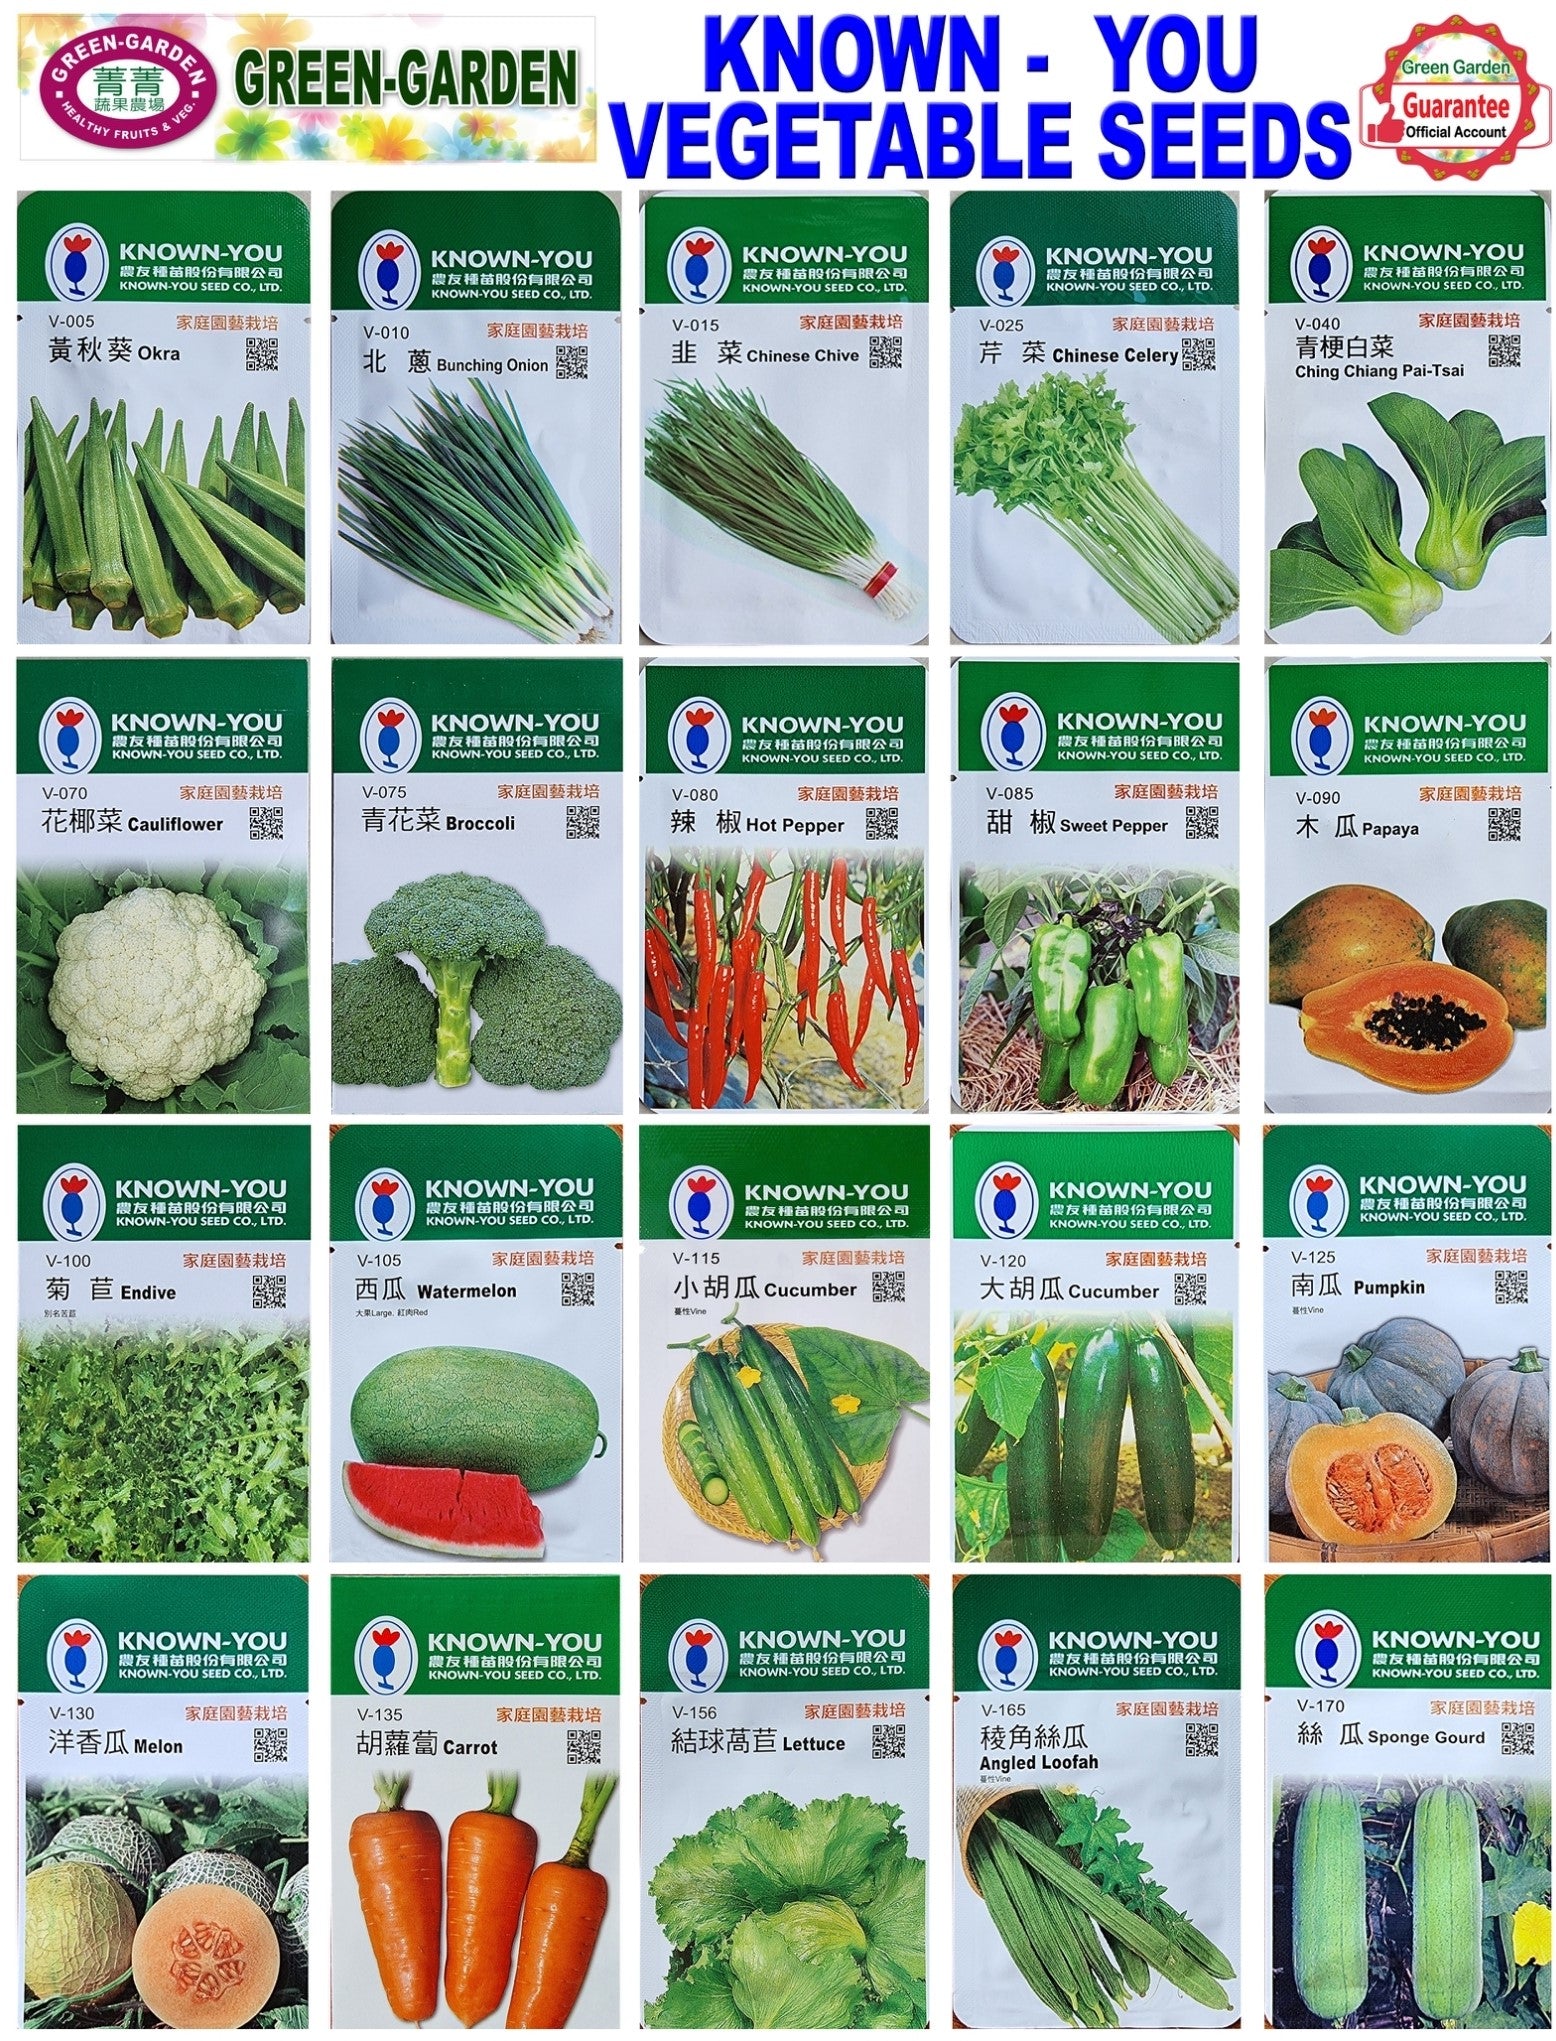 Known You Vegetable Seeds (V-240 Sweet Corn)